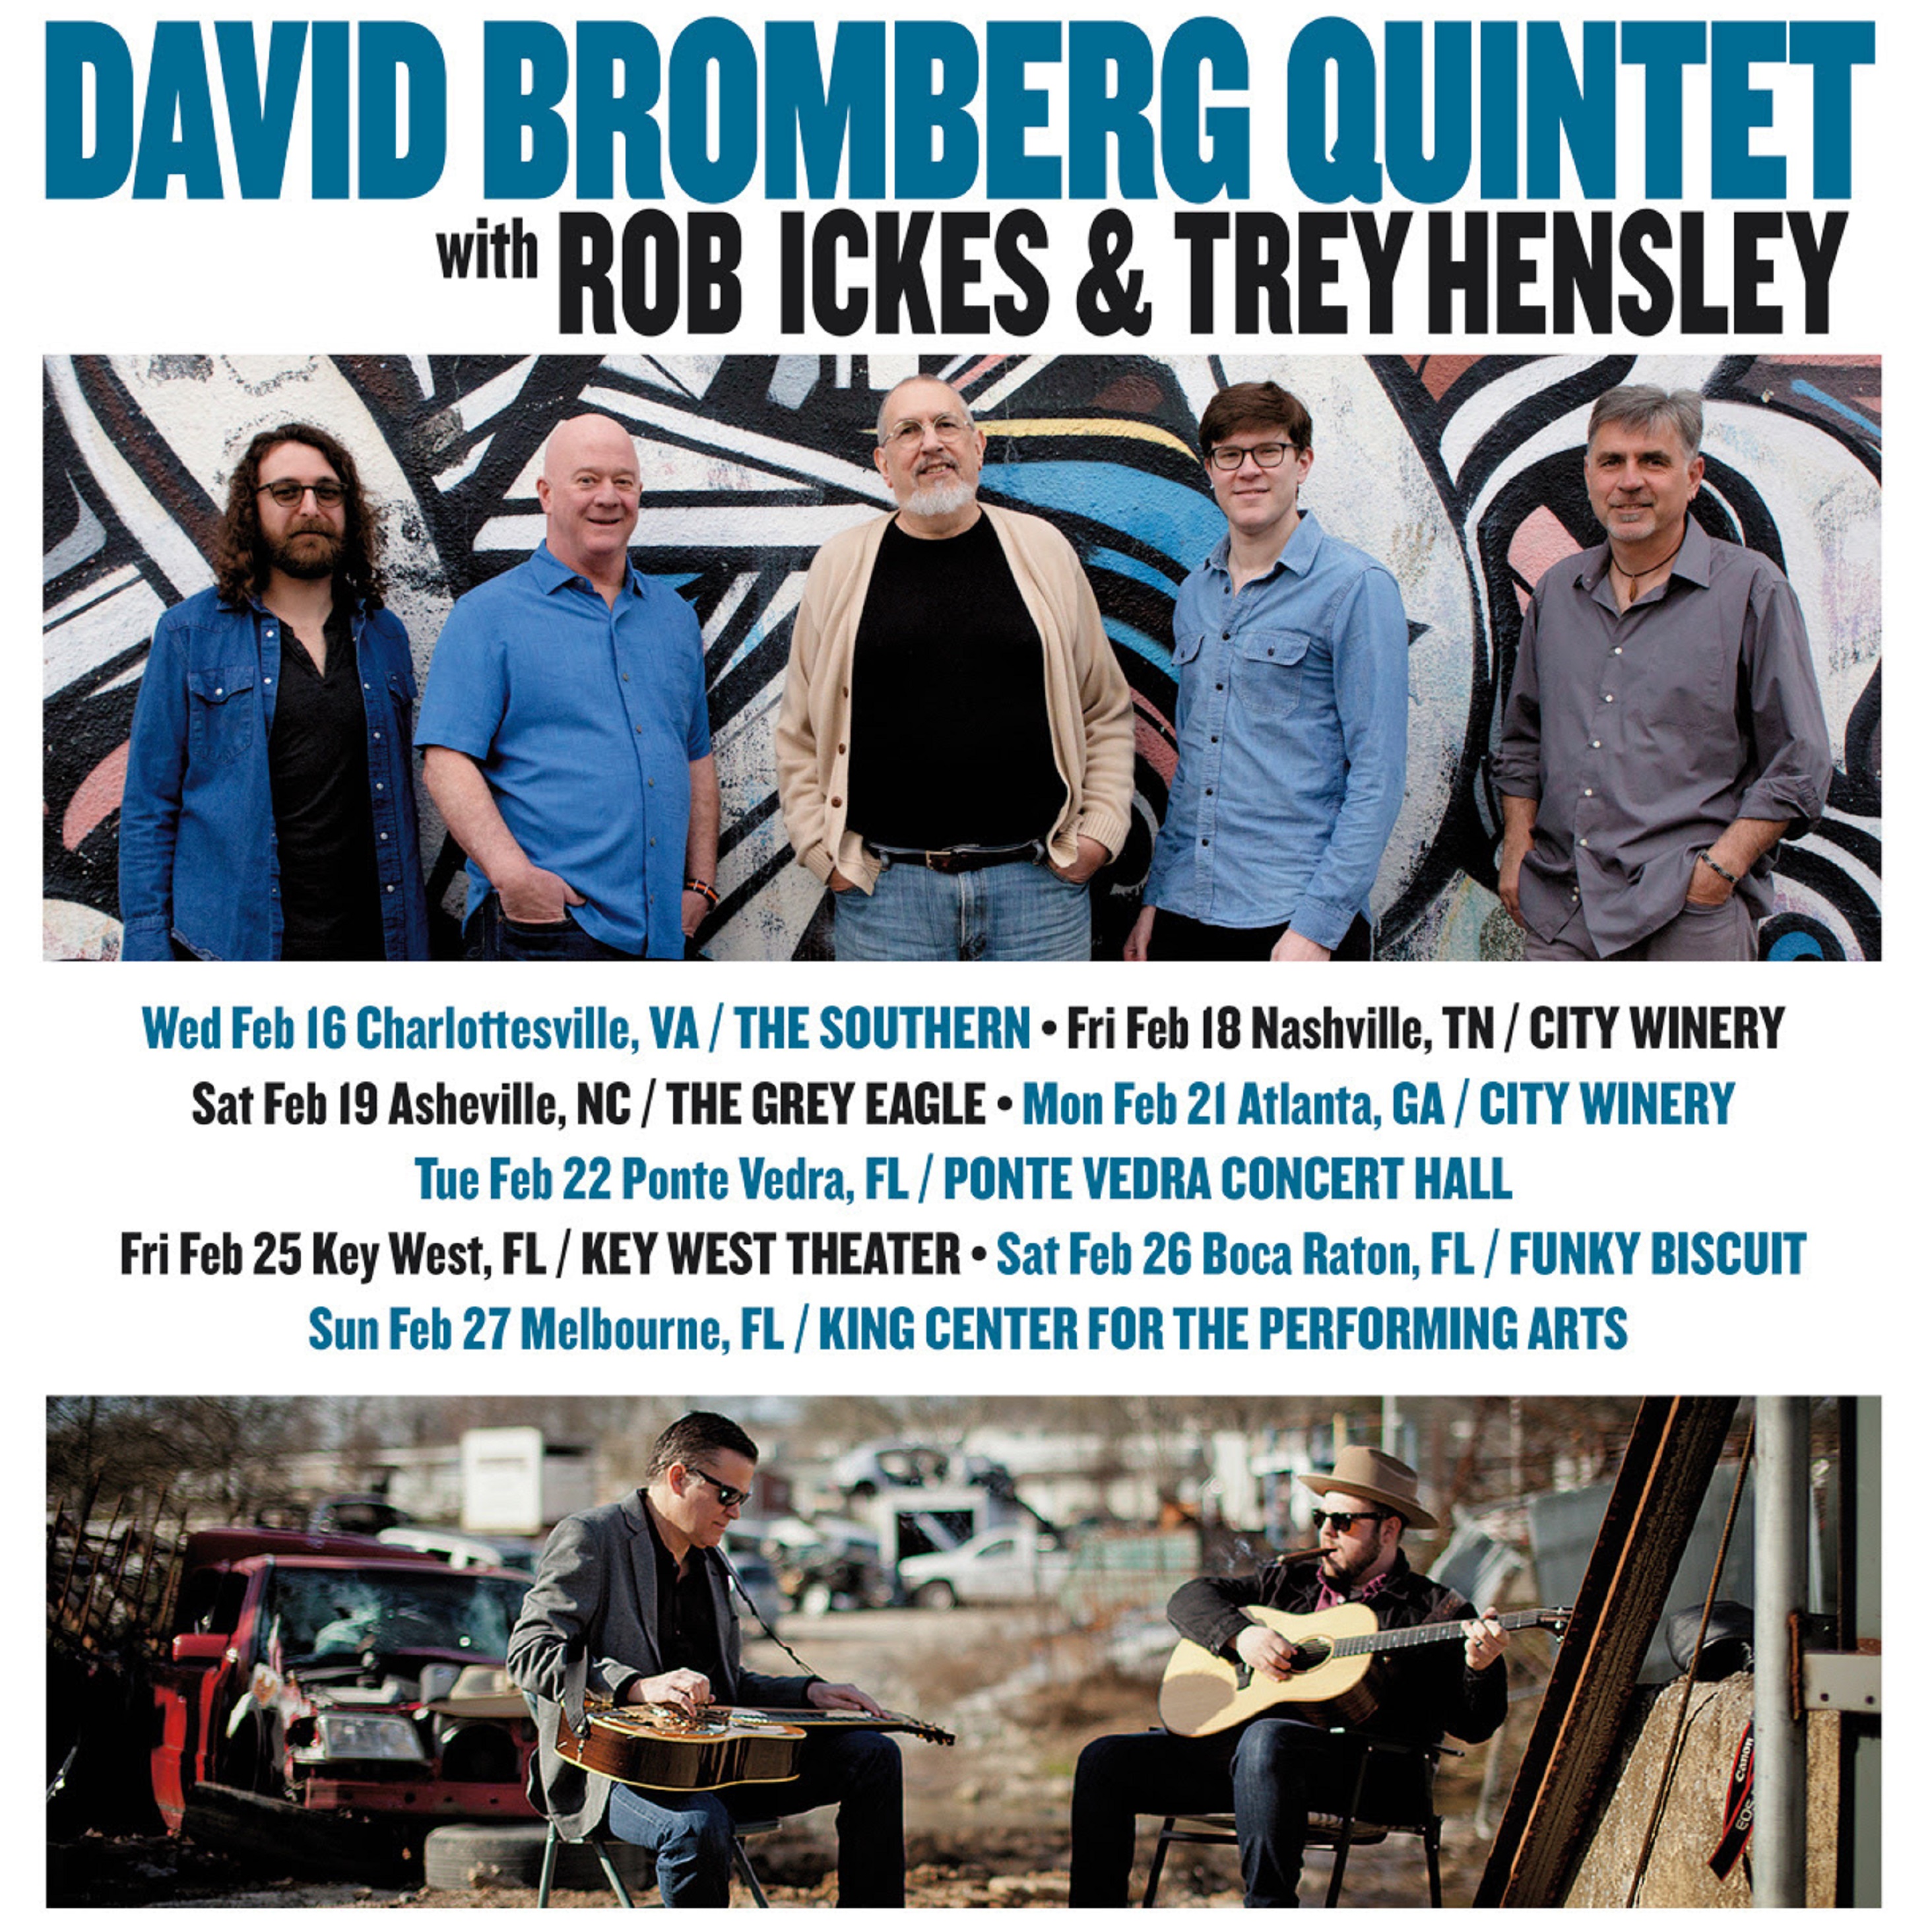 David Bromberg Quintet joins forces with Rob Ickes & Trey Hensley for